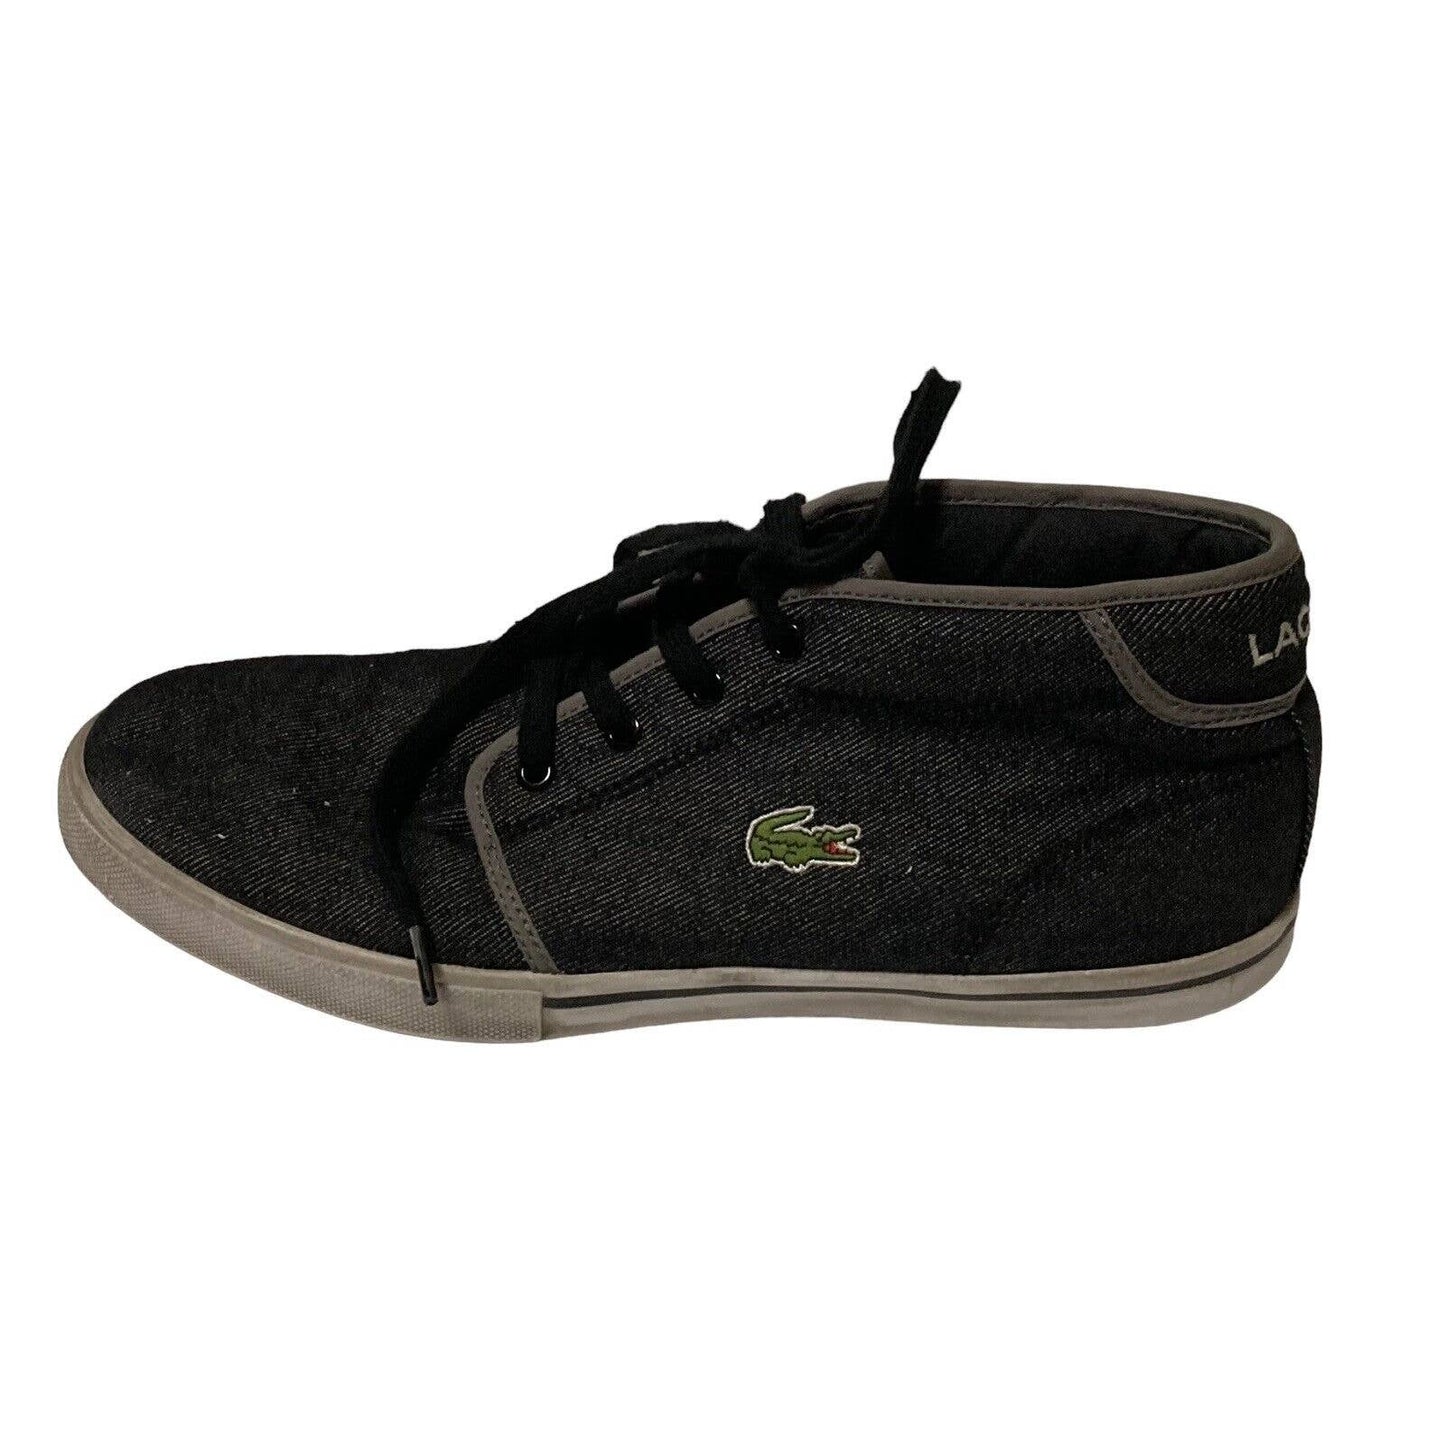 Lacoste Ampthill TK Sneakers Mens 8.5M Dark Gray Canvas Casual Hi Top Shoes